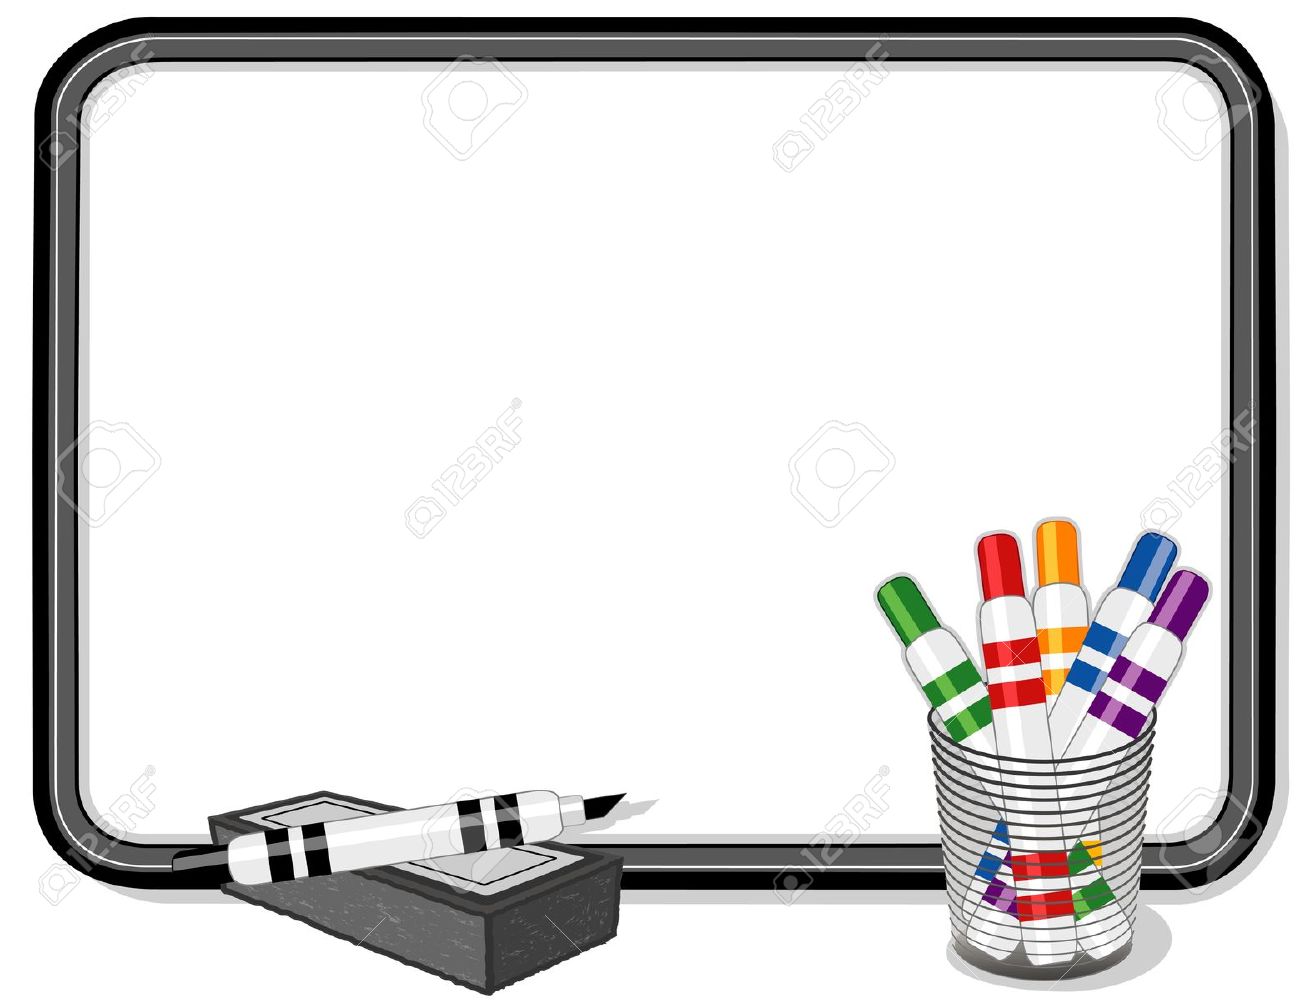 Whiteboard cliparts free.